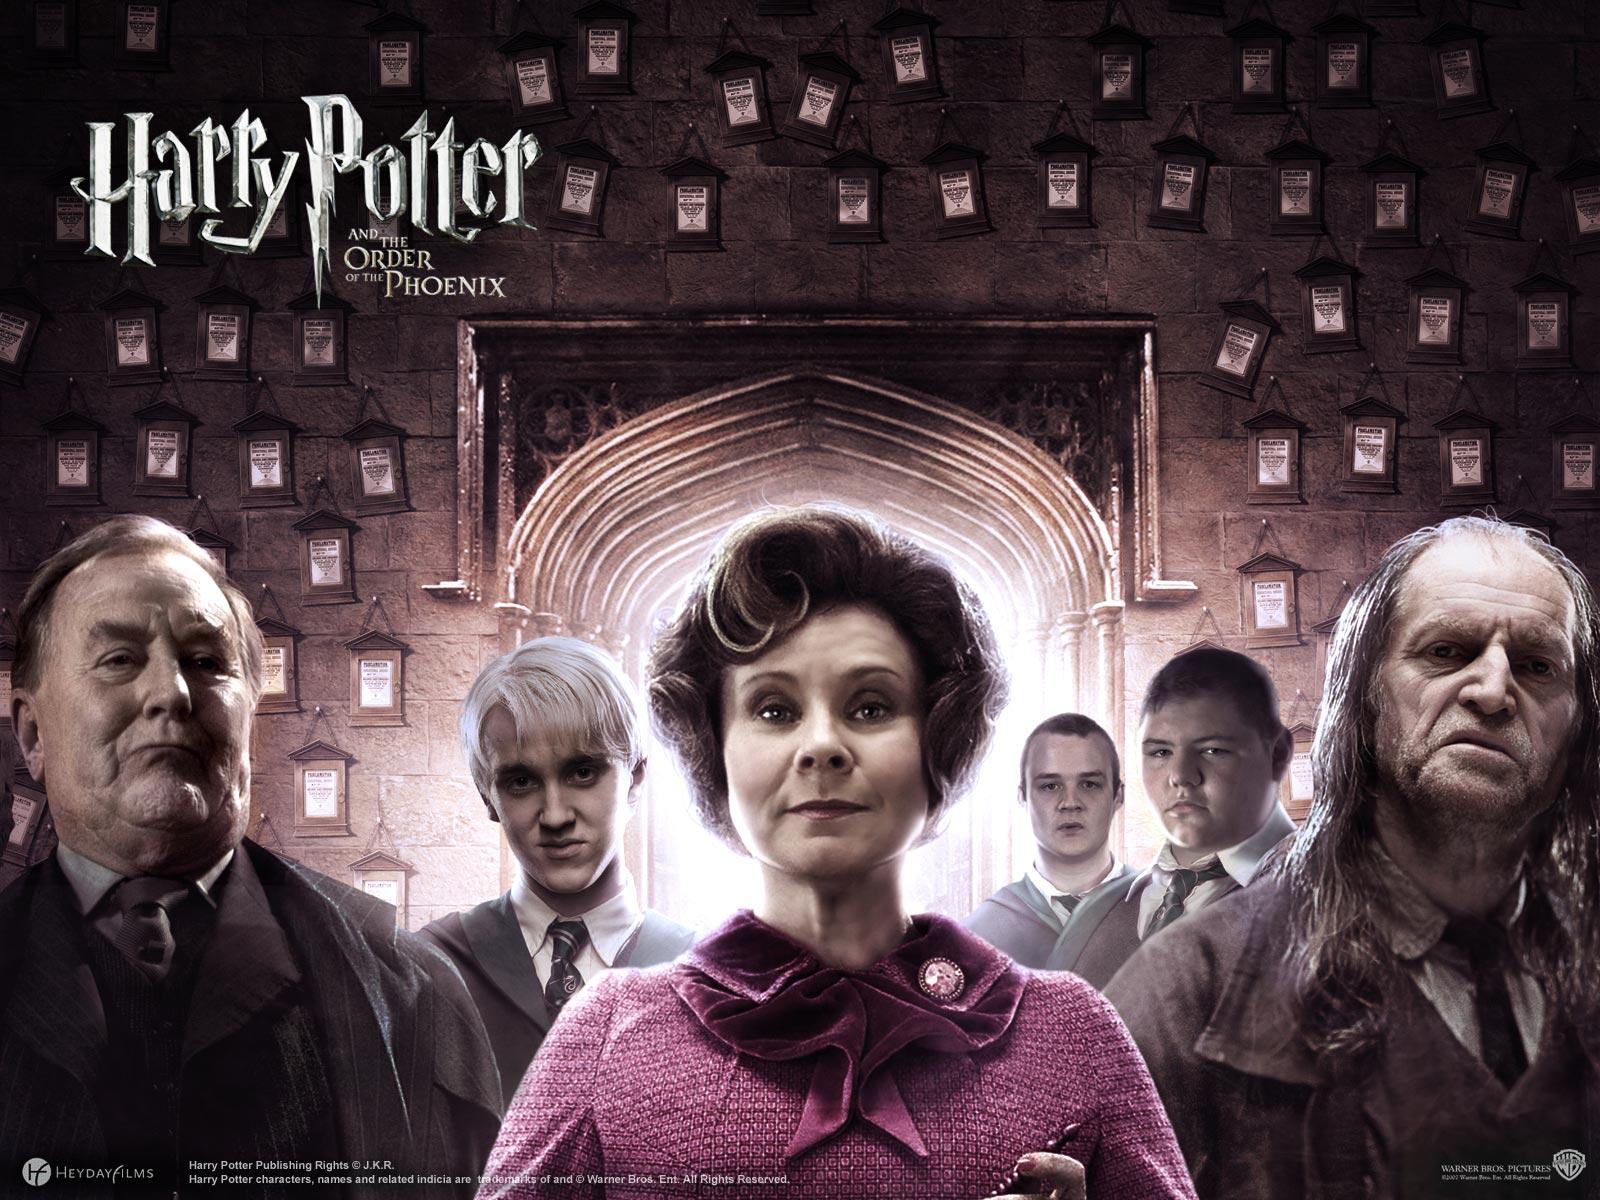 Harry Potter and Order of Phoenix wallpapers and images - wallpapers, pictures, photos